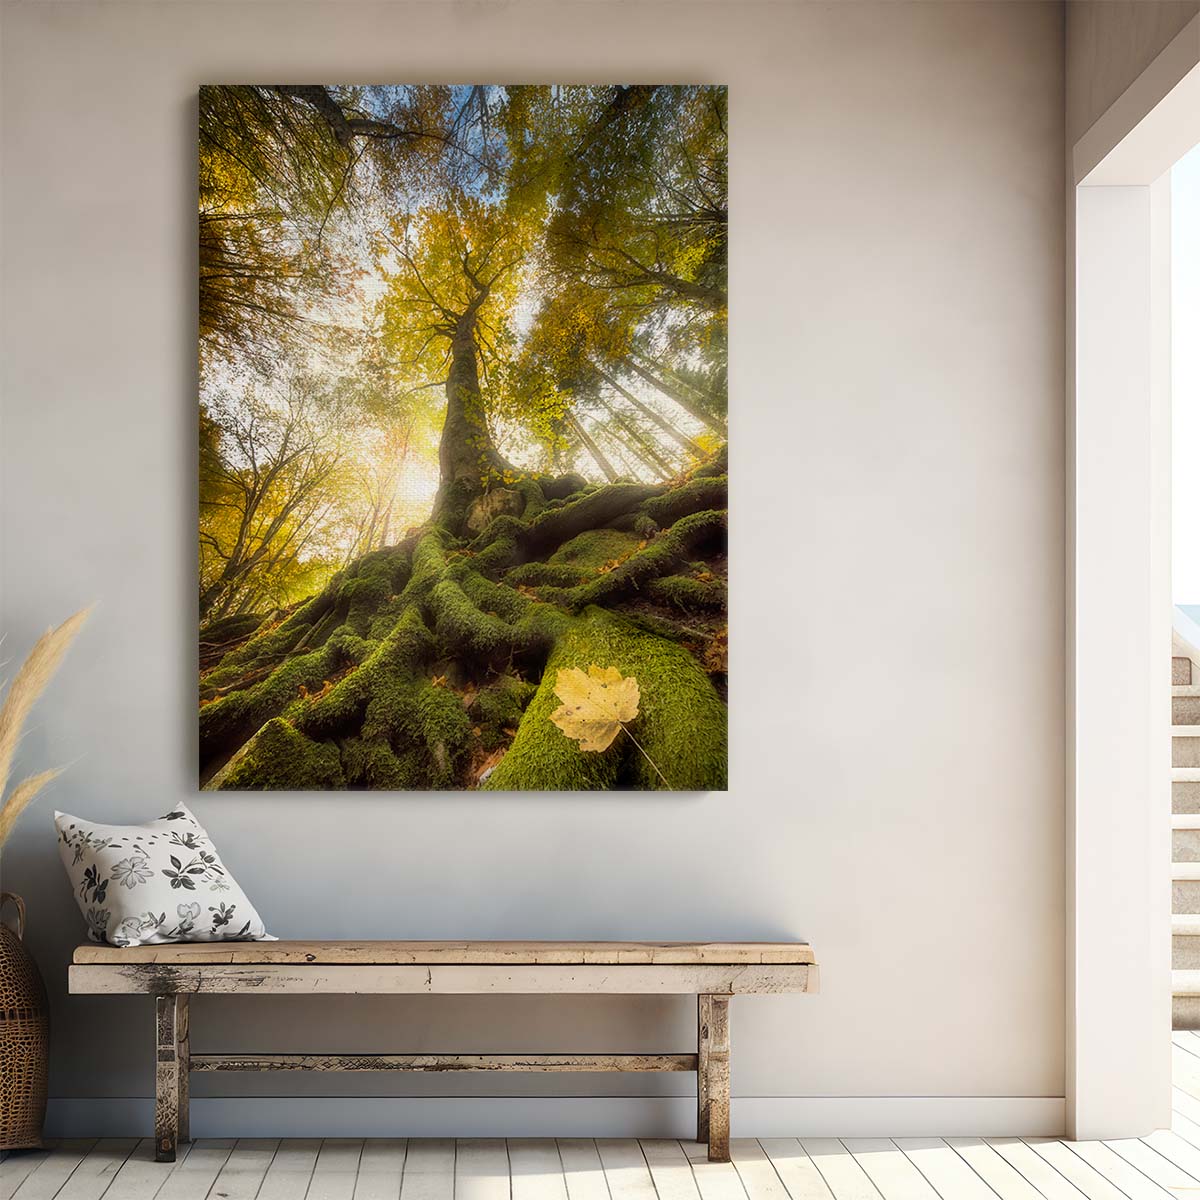 Majestic Autumn Maple Tree Photography Italian Sunrise Landscape by Luxuriance Designs, made in USA